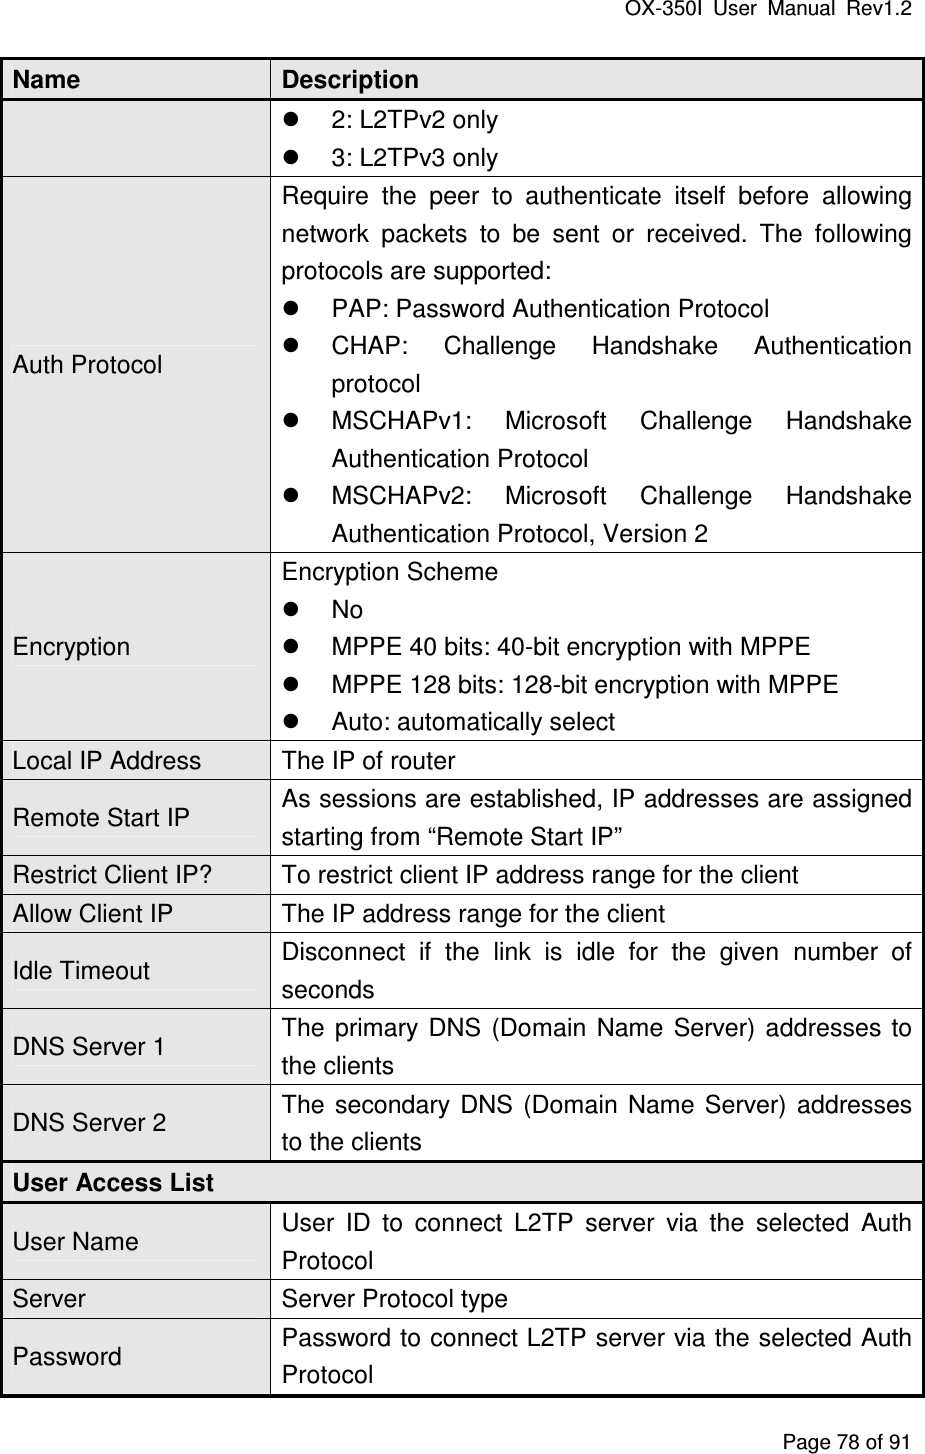 OX-350I  User  Manual  Rev1.2 Page 78 of 91 Name  Description   2: L2TPv2 only   3: L2TPv3 only Auth Protocol Require  the  peer  to  authenticate  itself  before  allowing network  packets  to  be  sent  or  received.  The  following protocols are supported:   PAP: Password Authentication Protocol   CHAP:  Challenge  Handshake  Authentication protocol   MSCHAPv1:  Microsoft  Challenge  Handshake Authentication Protocol   MSCHAPv2:  Microsoft  Challenge  Handshake Authentication Protocol, Version 2 Encryption Encryption Scheme   No   MPPE 40 bits: 40-bit encryption with MPPE   MPPE 128 bits: 128-bit encryption with MPPE   Auto: automatically select Local IP Address  The IP of router Remote Start IP  As sessions are established, IP addresses are assigned starting from “Remote Start IP” Restrict Client IP?  To restrict client IP address range for the client Allow Client IP  The IP address range for the client Idle Timeout  Disconnect  if  the  link  is  idle  for  the  given  number  of seconds DNS Server 1  The  primary  DNS  (Domain  Name  Server) addresses  to the clients DNS Server 2  The  secondary  DNS  (Domain  Name  Server)  addresses to the clients User Access List User Name  User  ID  to  connect  L2TP  server  via  the  selected  Auth Protocol Server  Server Protocol type Password  Password to connect L2TP server via the selected Auth Protocol 